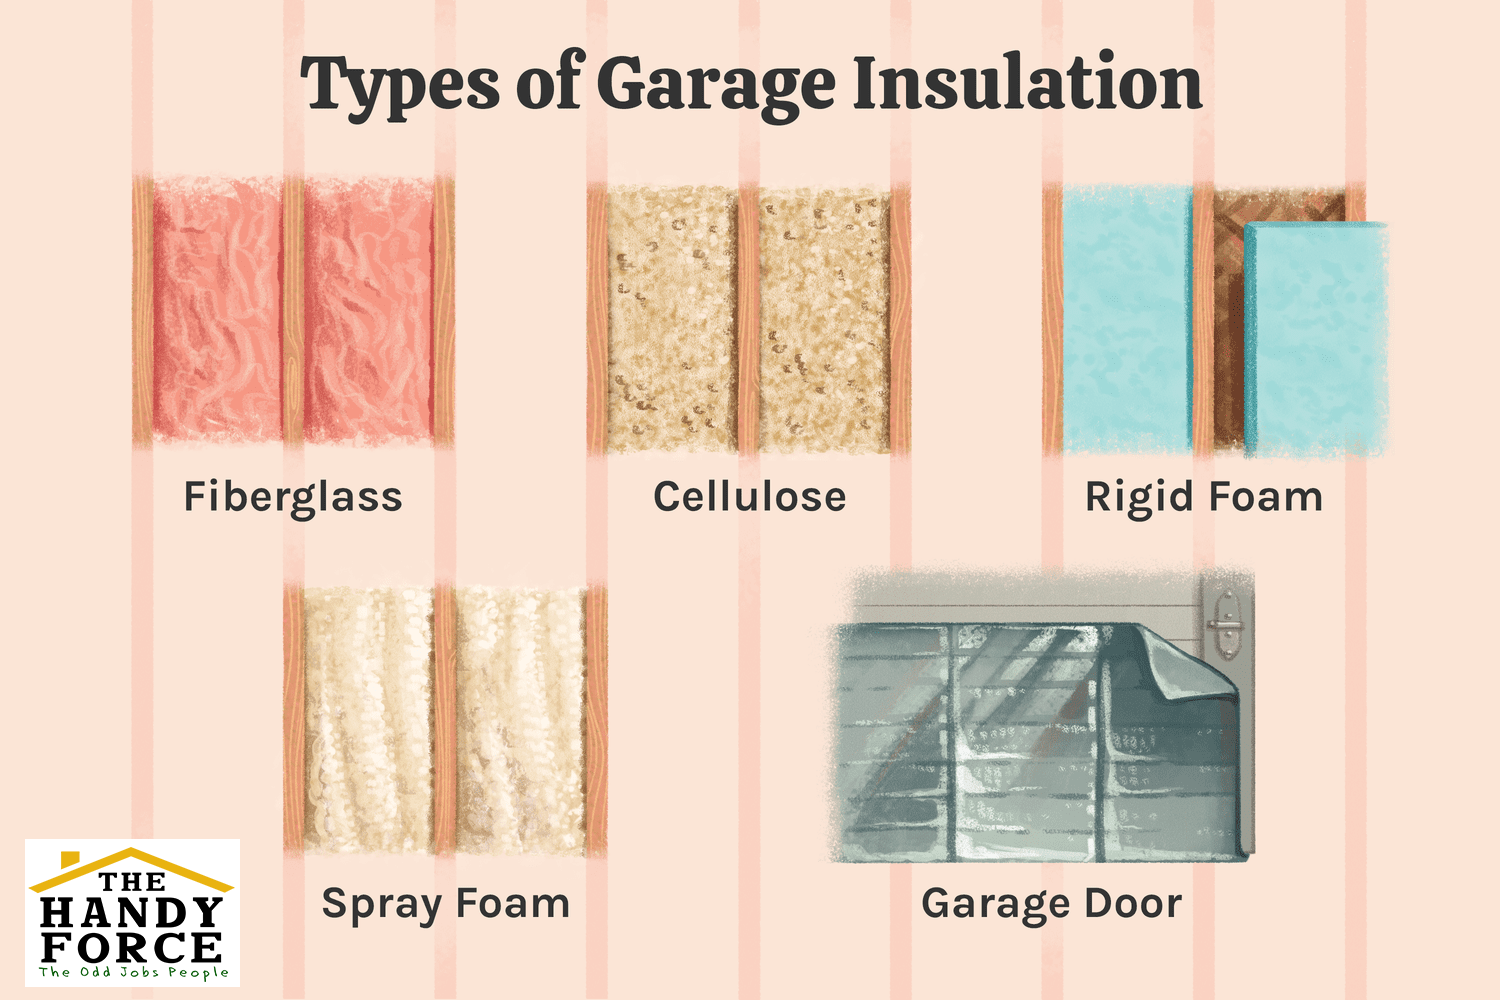 The Best and Most Effective Insulation Upgrades